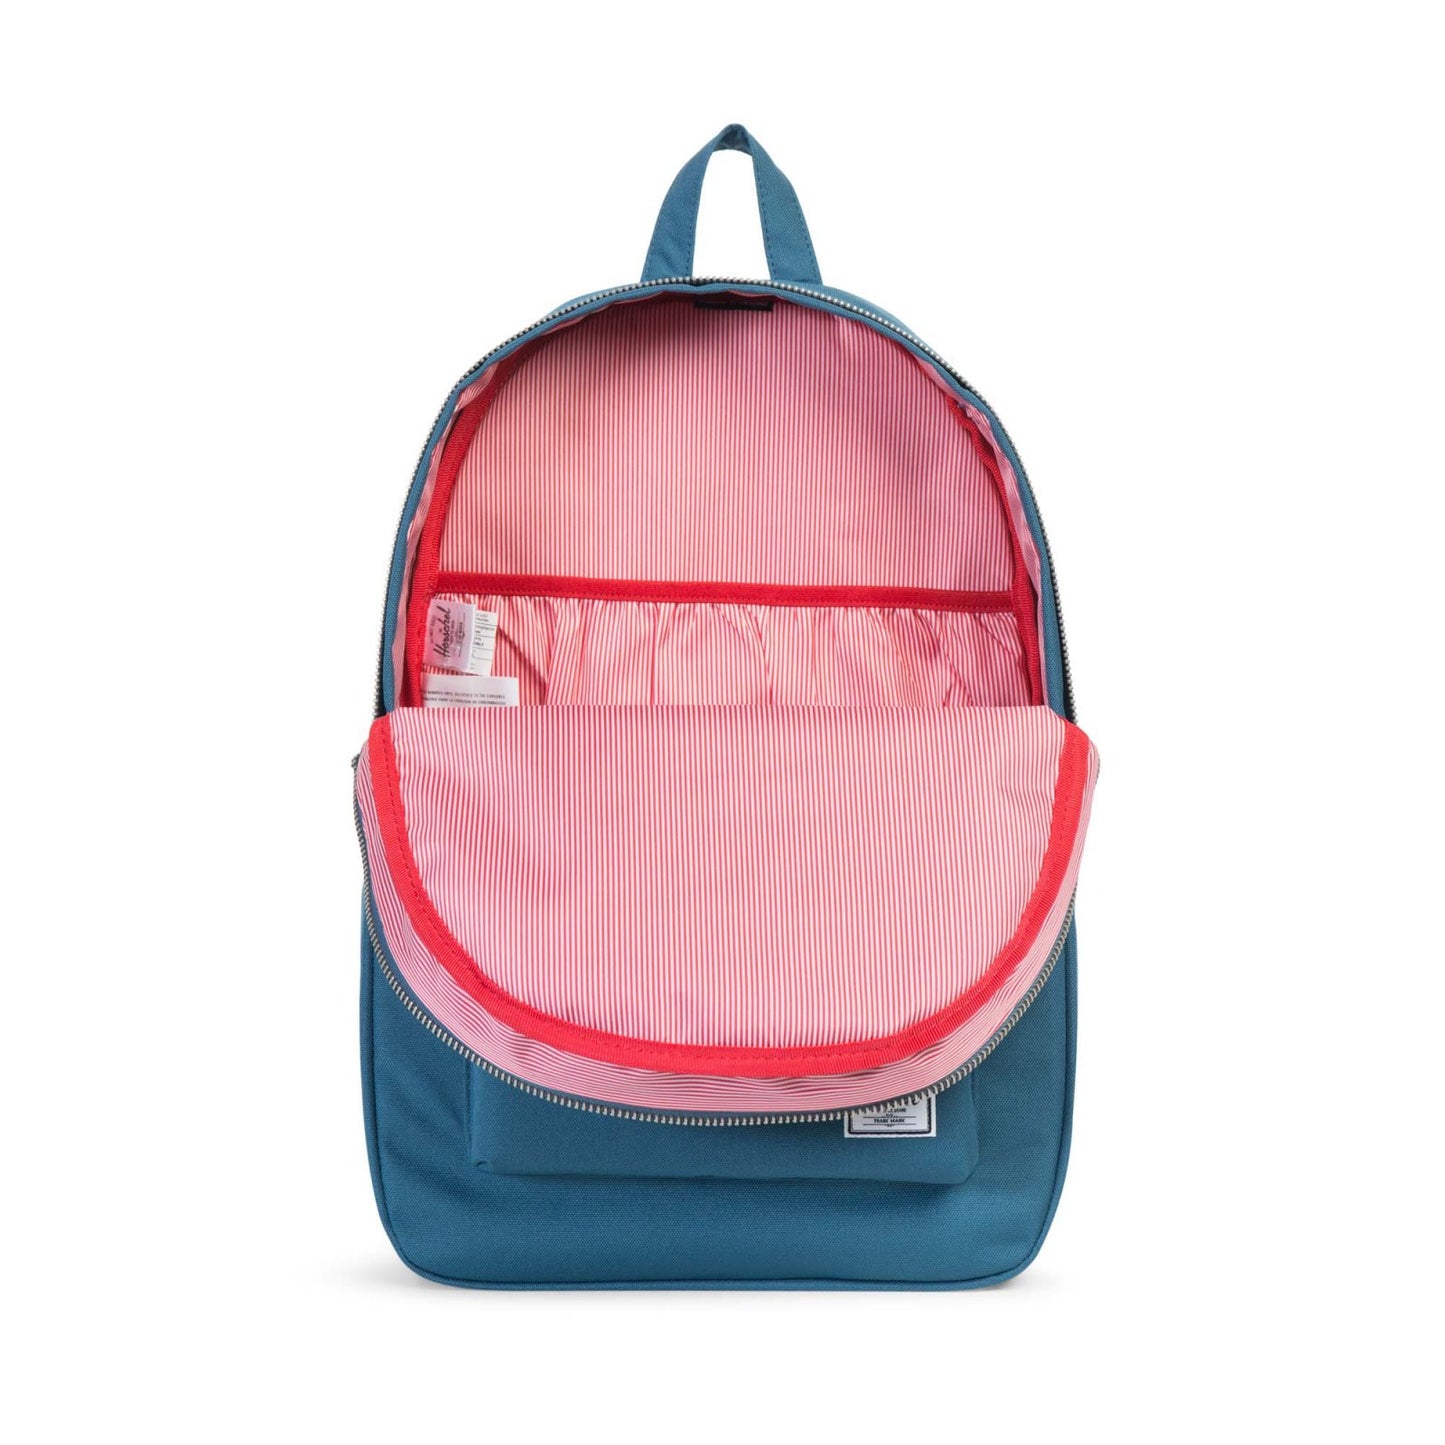 Herschel Supply Co. - Settlement Backpack, Indian Teal - The Giant Peach